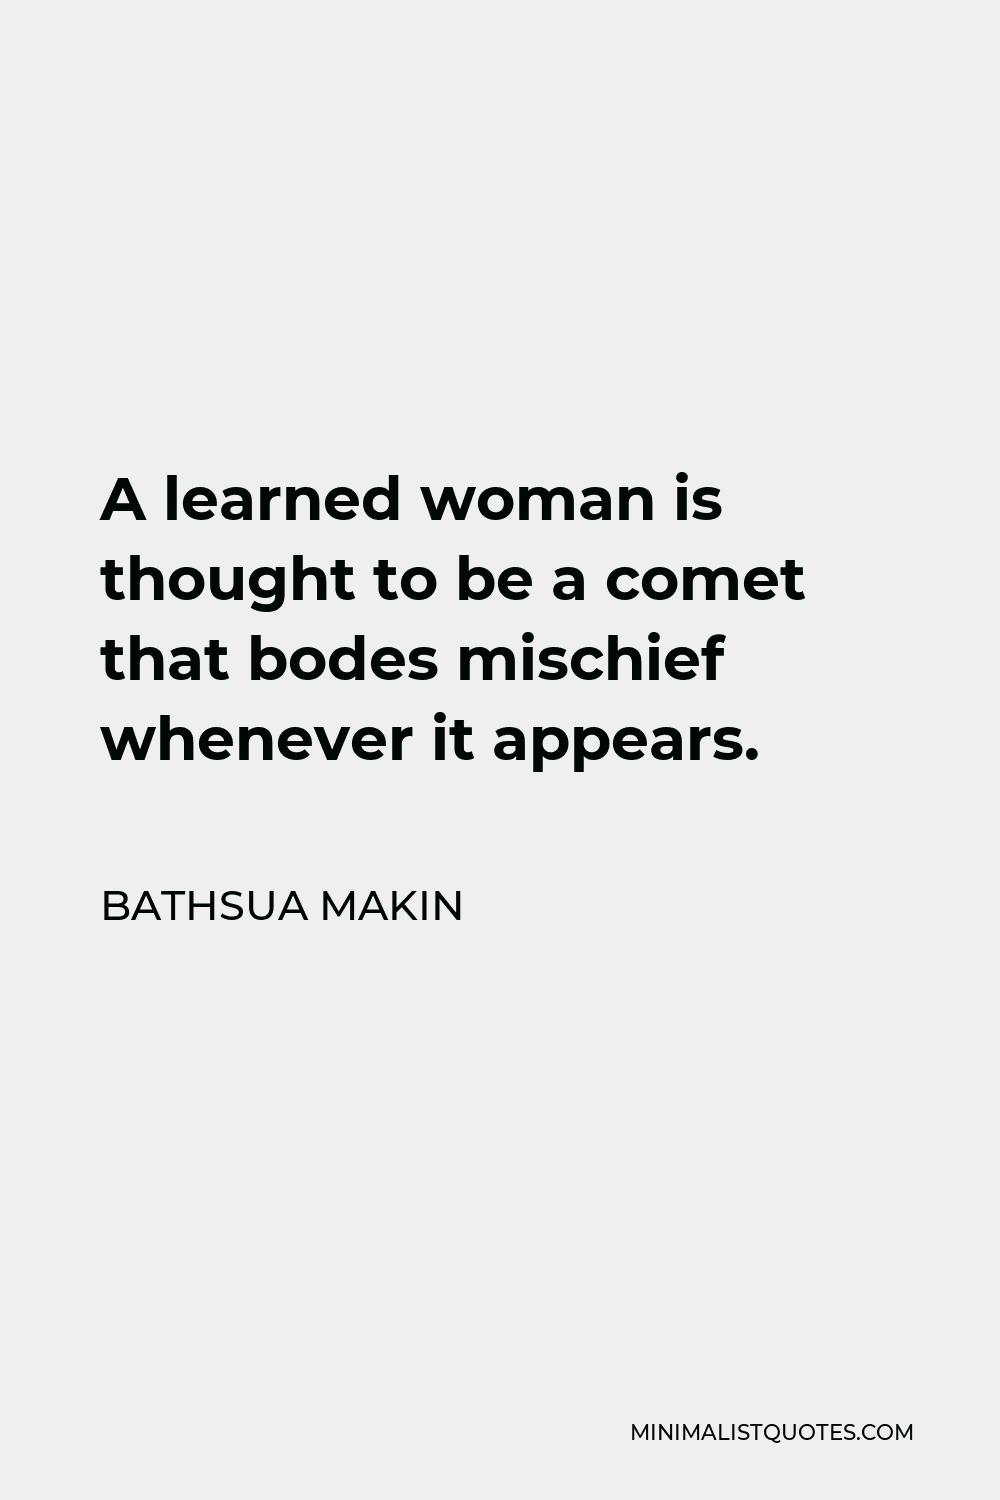 Bathsua Makin Quote - A learned woman is thought to be a comet that bodes mischief whenever it appears.